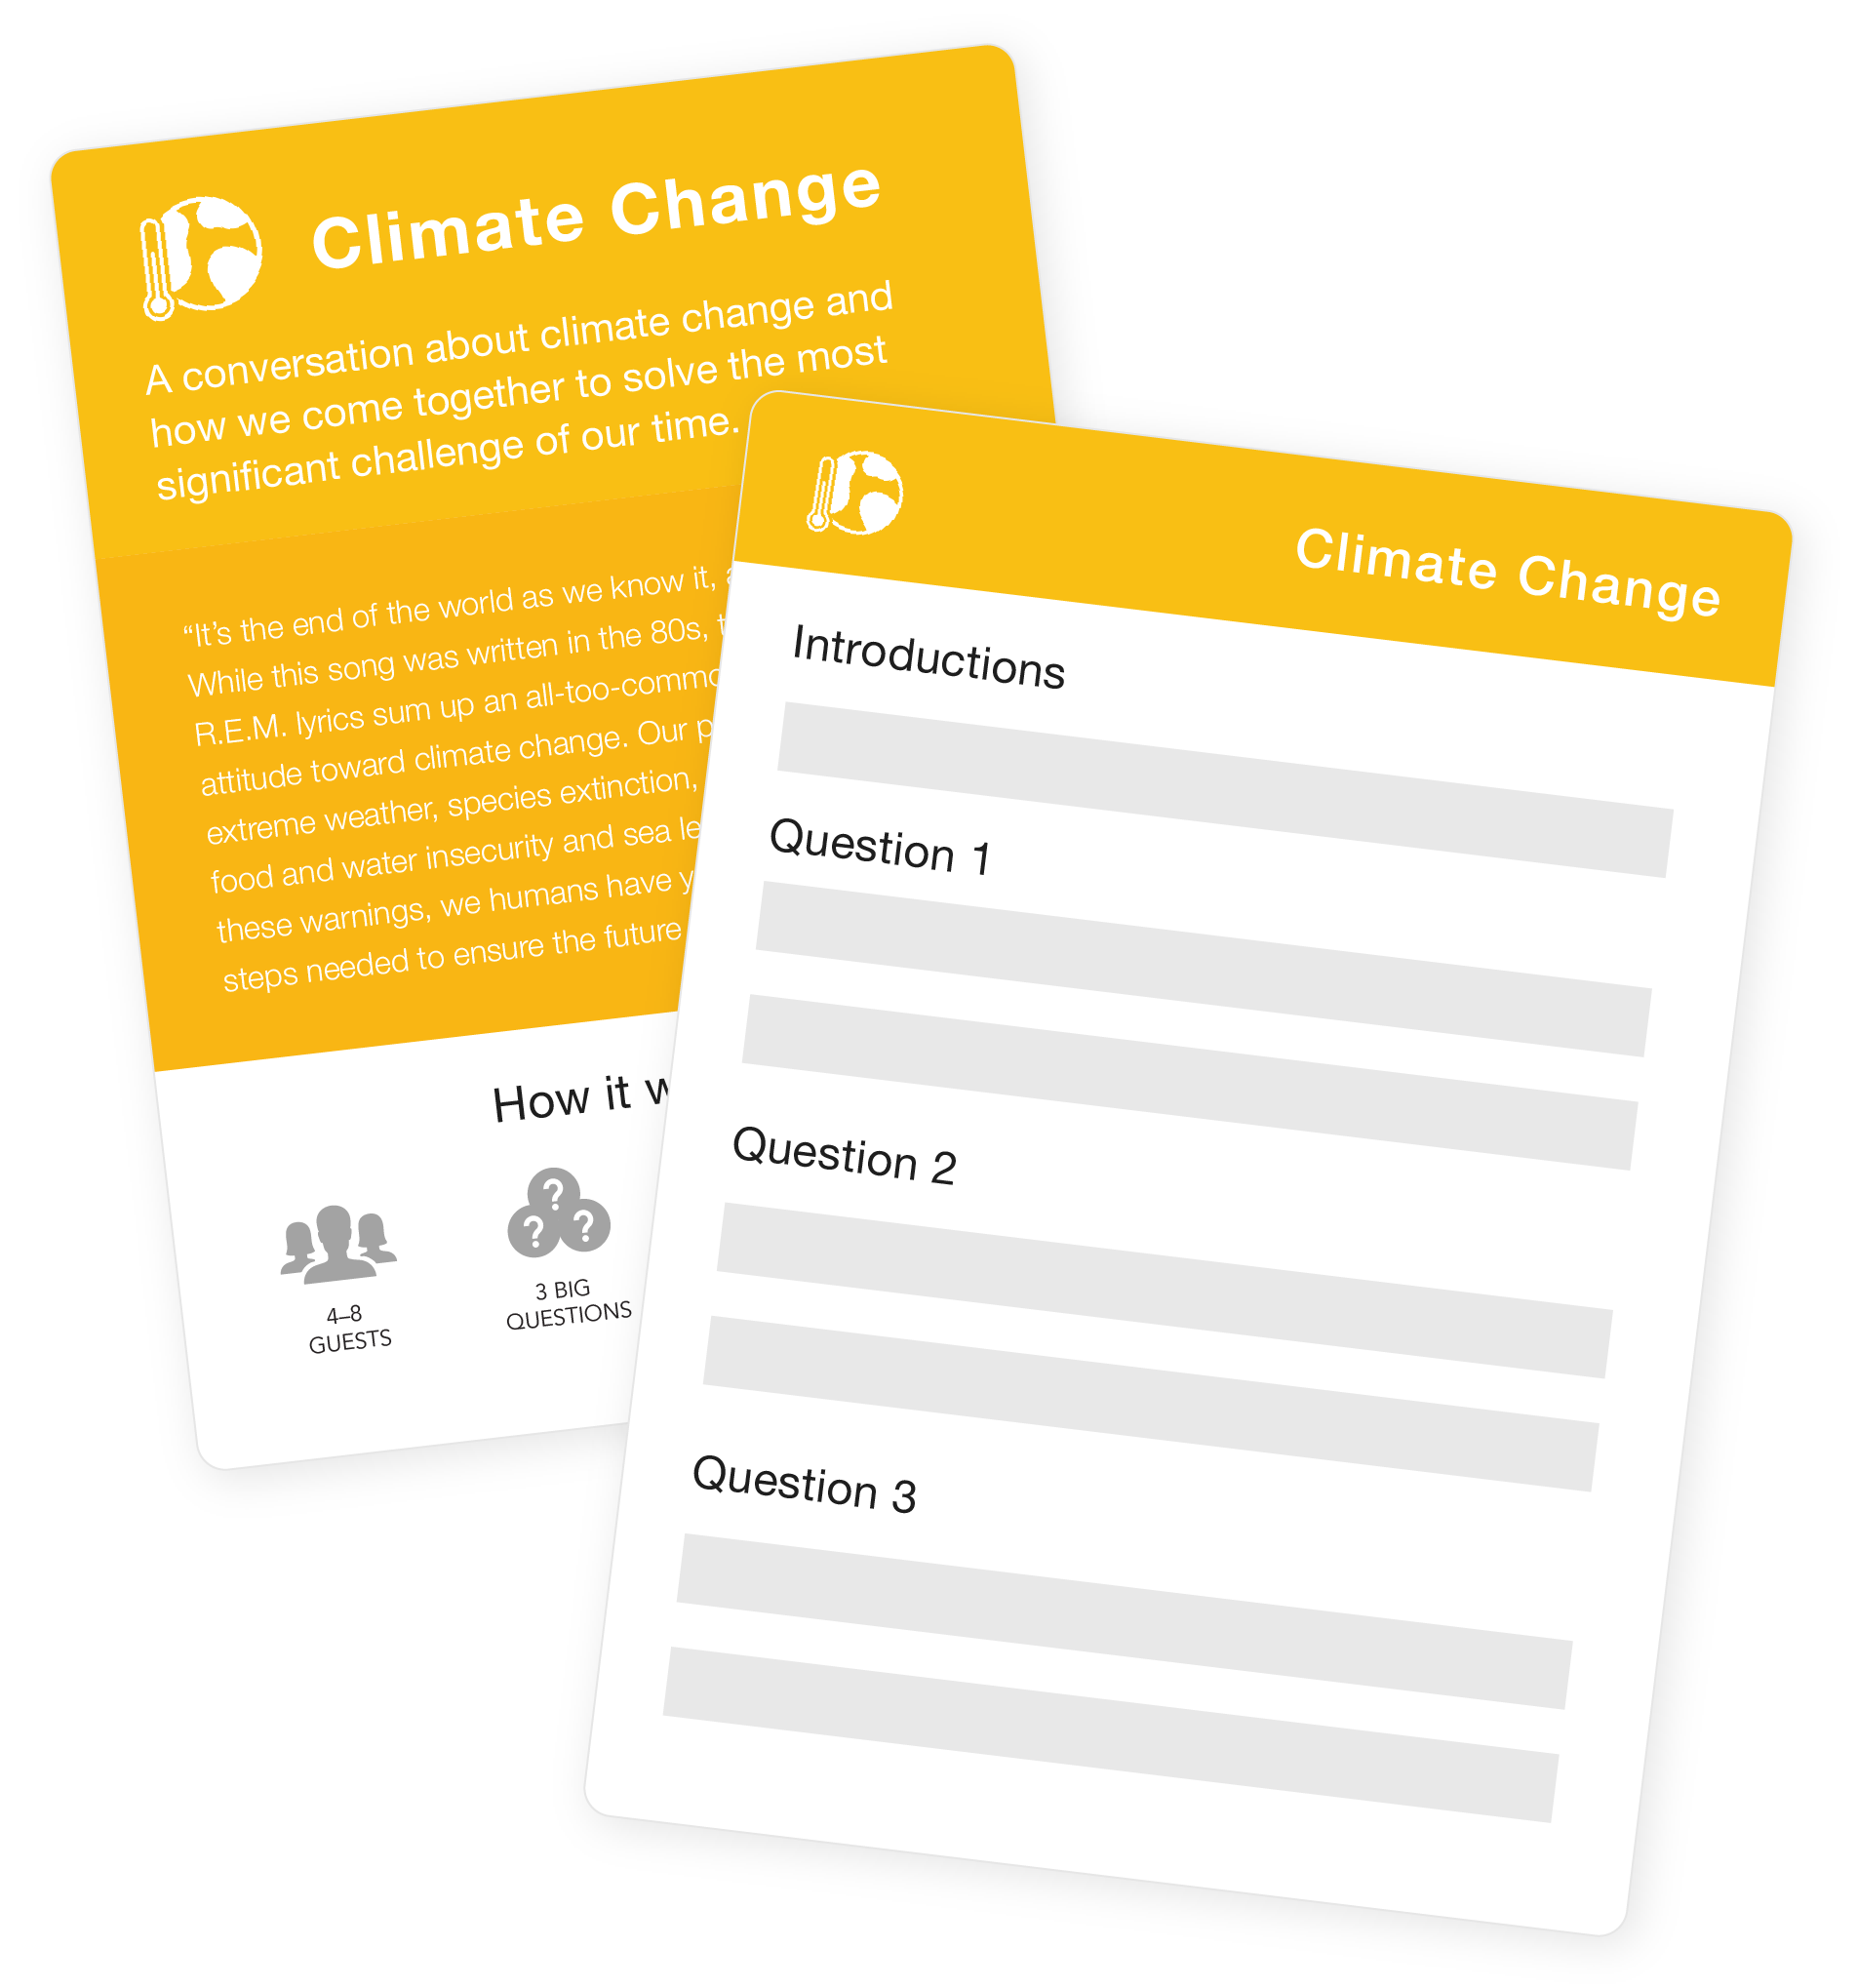 Climate Change_Host Guide-06